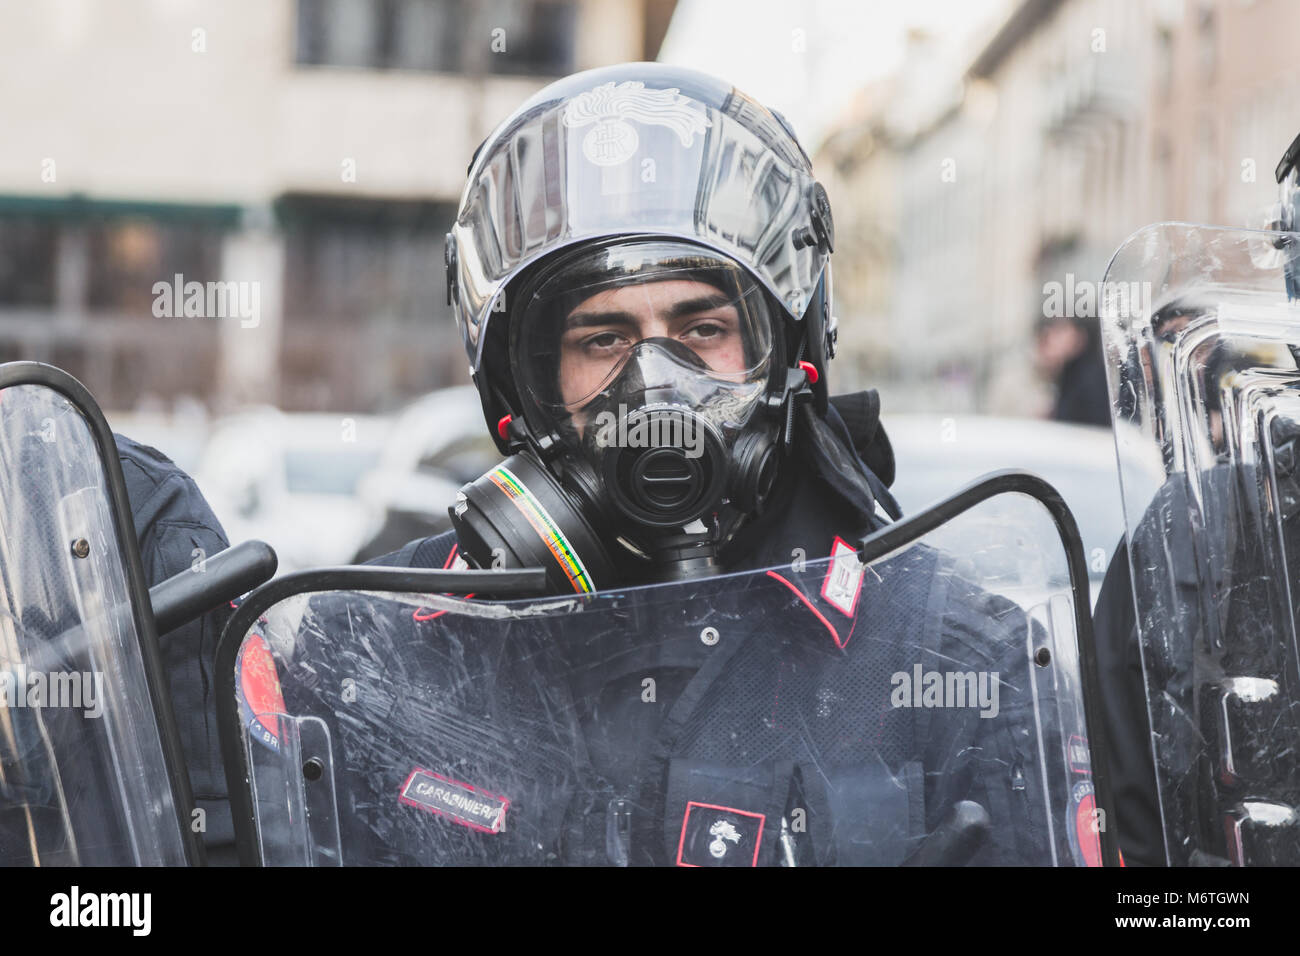 MILAN, ITALY - FEBRUARY 24: Portrait of a riot policeman wearing gas mask during an anti-fascist march in the city streets on FEBRUARY 24, 2018 in Mil Stock Photo